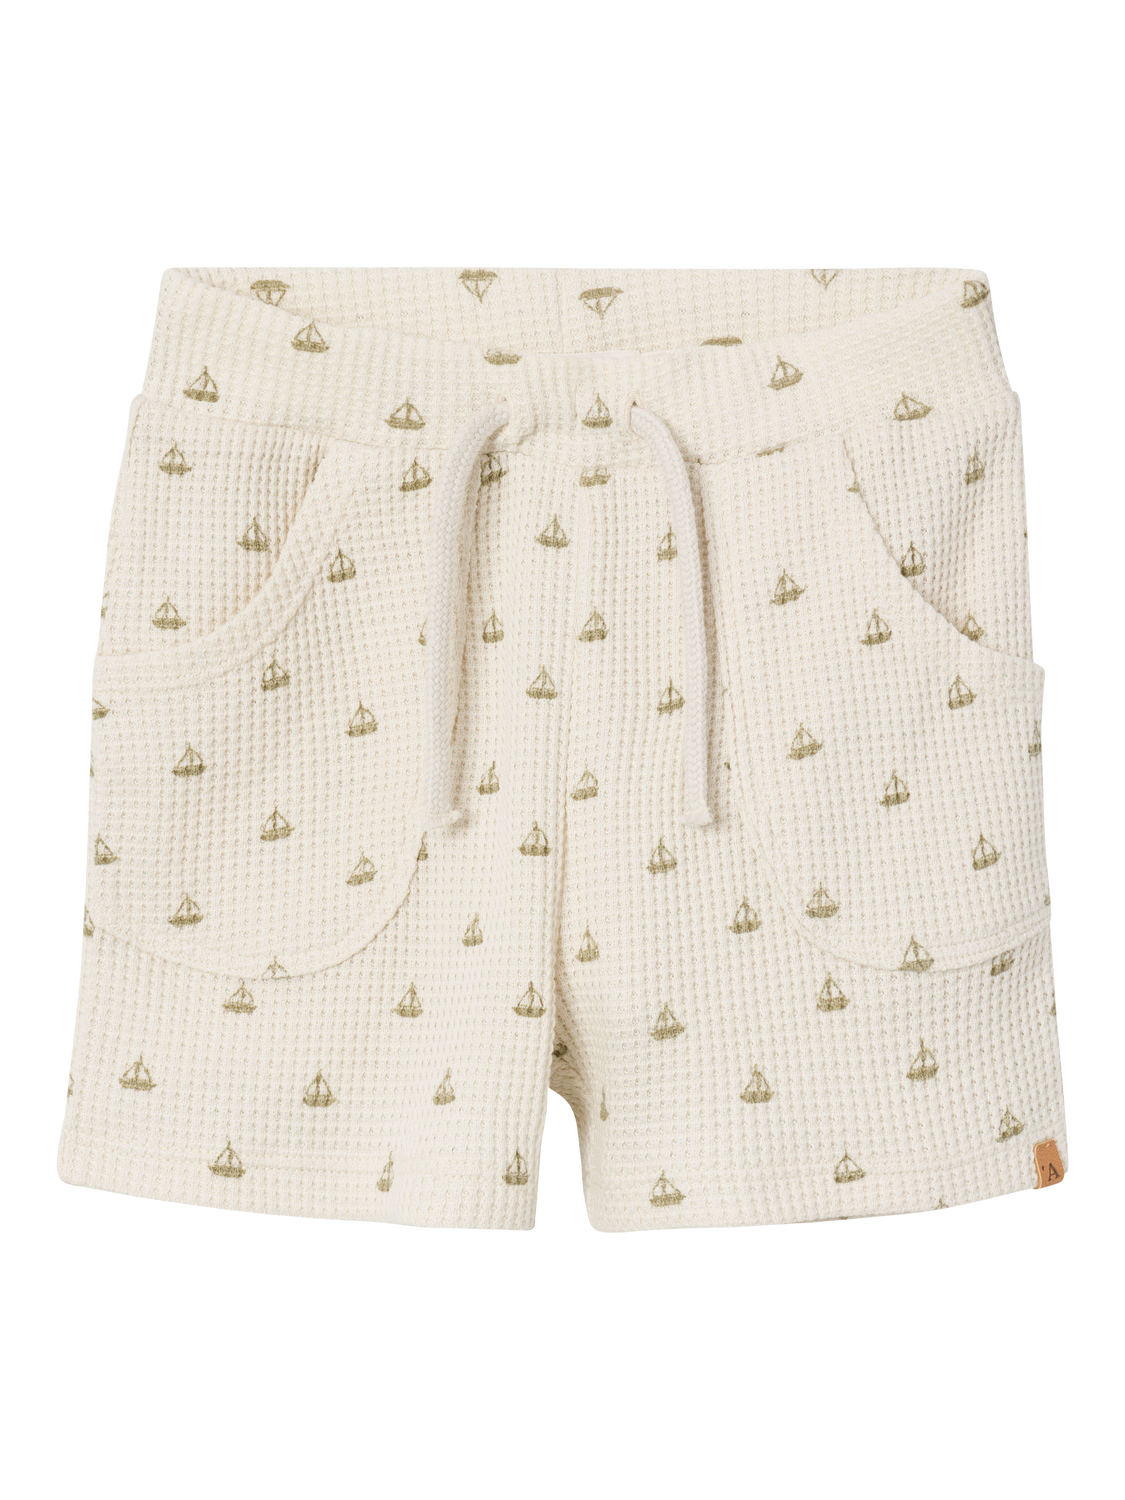 Frede loose shorts turtledove, lil atelier